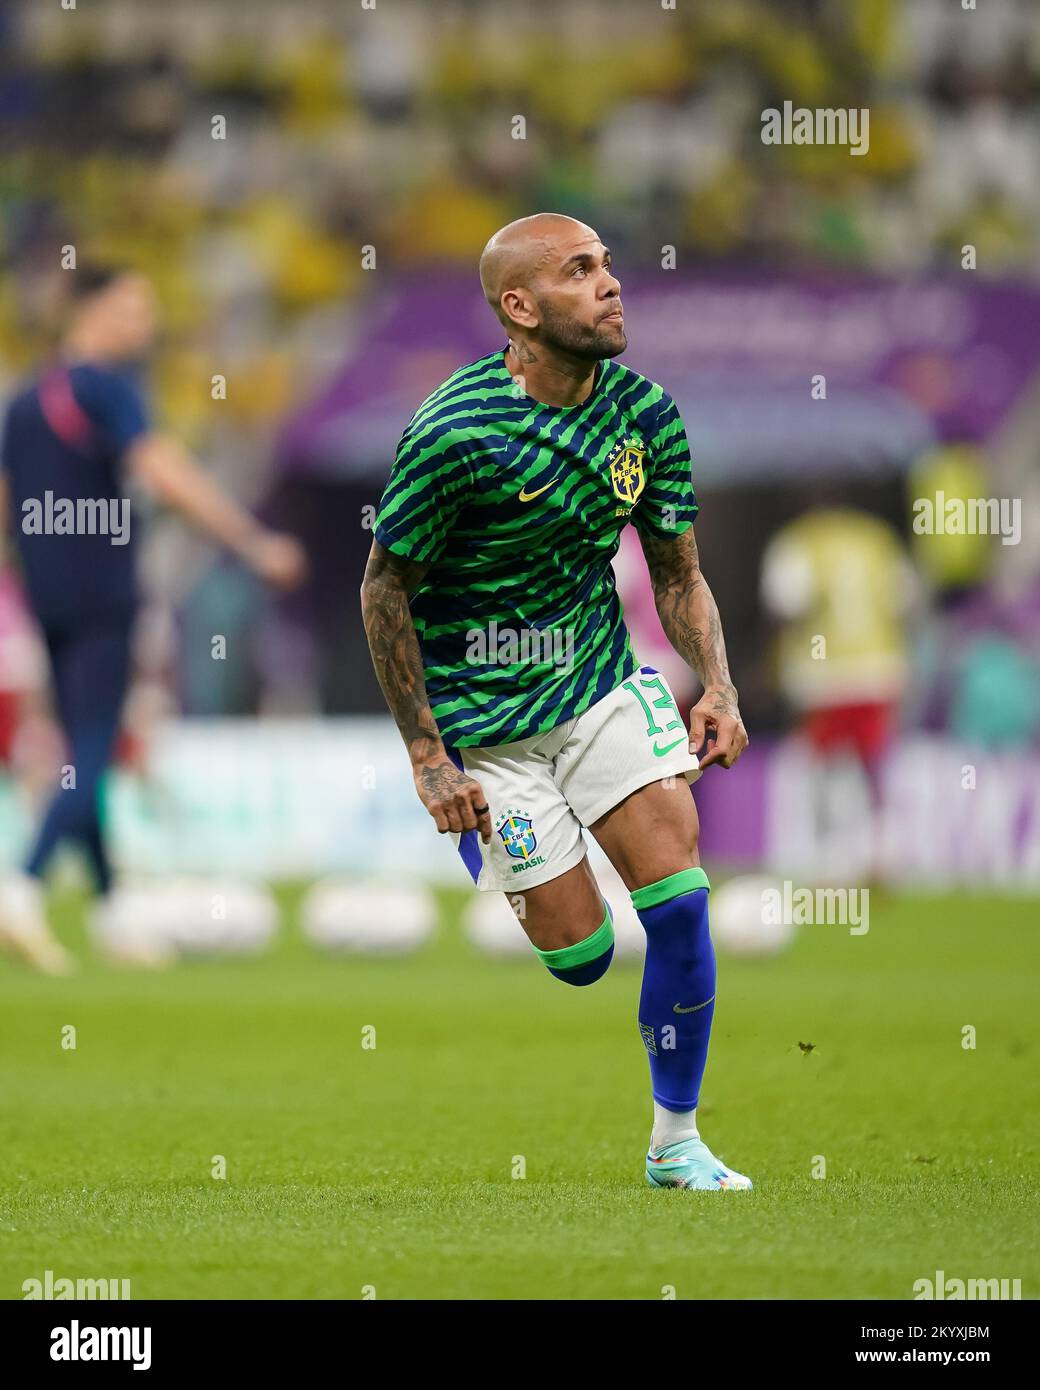 Lusail, Qatar. 02nd Dec, 2022. Lusail Stadium LUSAIL, QATAR - DECEMBER 2: Player of Brazil Dani Alves warms up before the FIFA World Cup Qatar 2022 group G match between Brazil and Cameroon at Lusail Stadium on December 2, 2022 in Lusail, Qatar. (Photo by Florencia Tan Jun/PxImages) (Florencia Tan Jun/SPP) Credit: SPP Sport Press Photo. /Alamy Live News Stock Photo